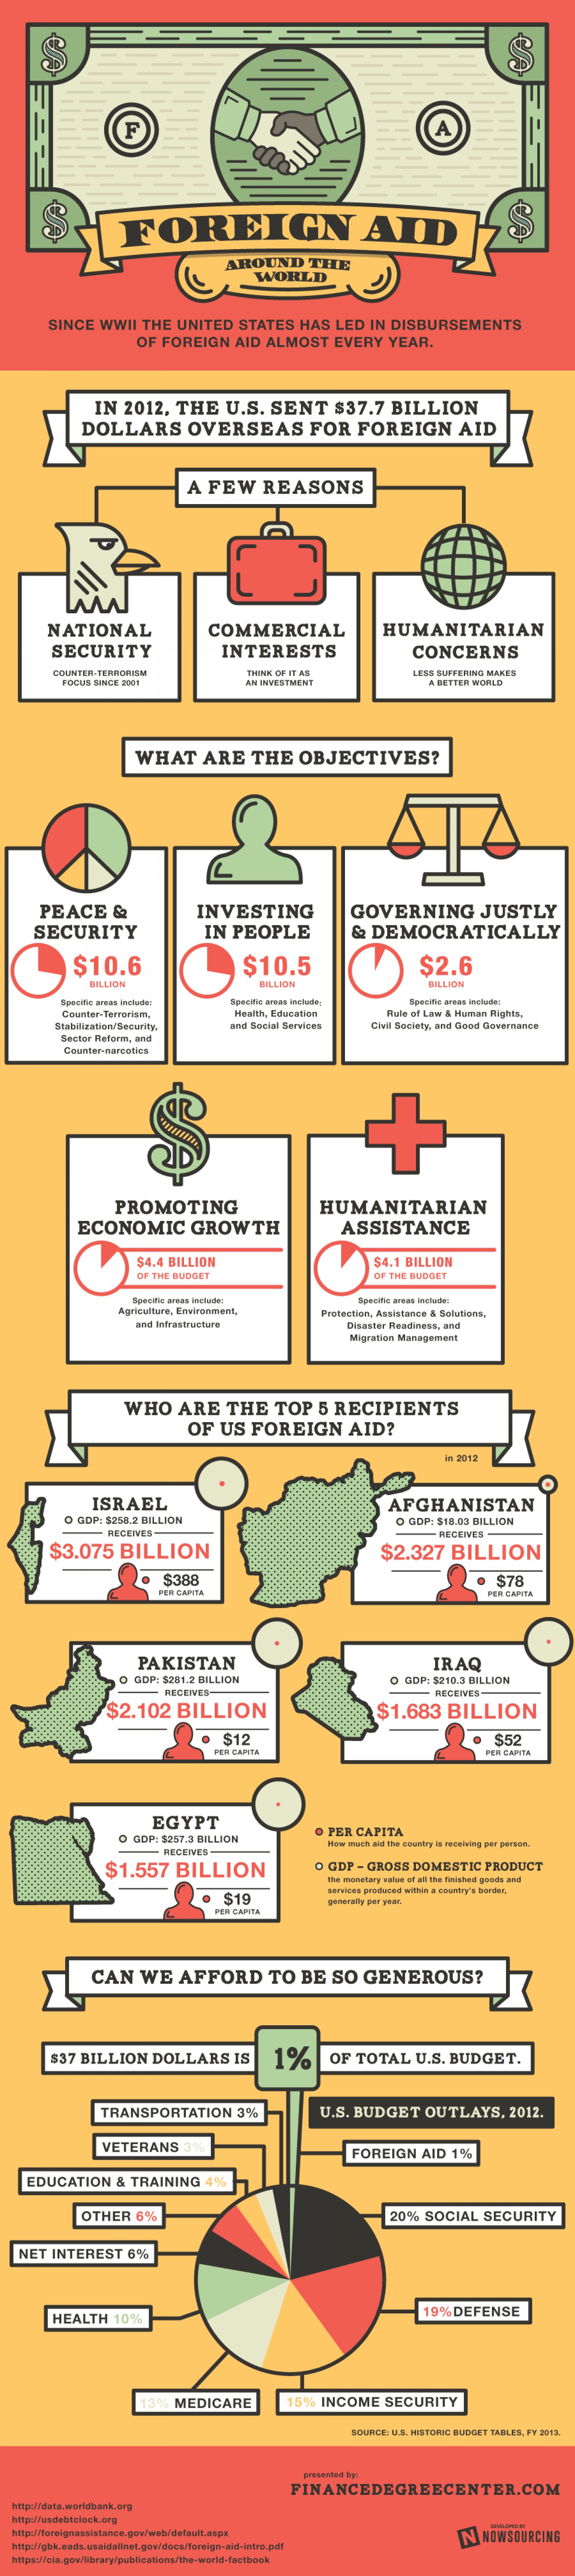 Foreign Aid Around the World